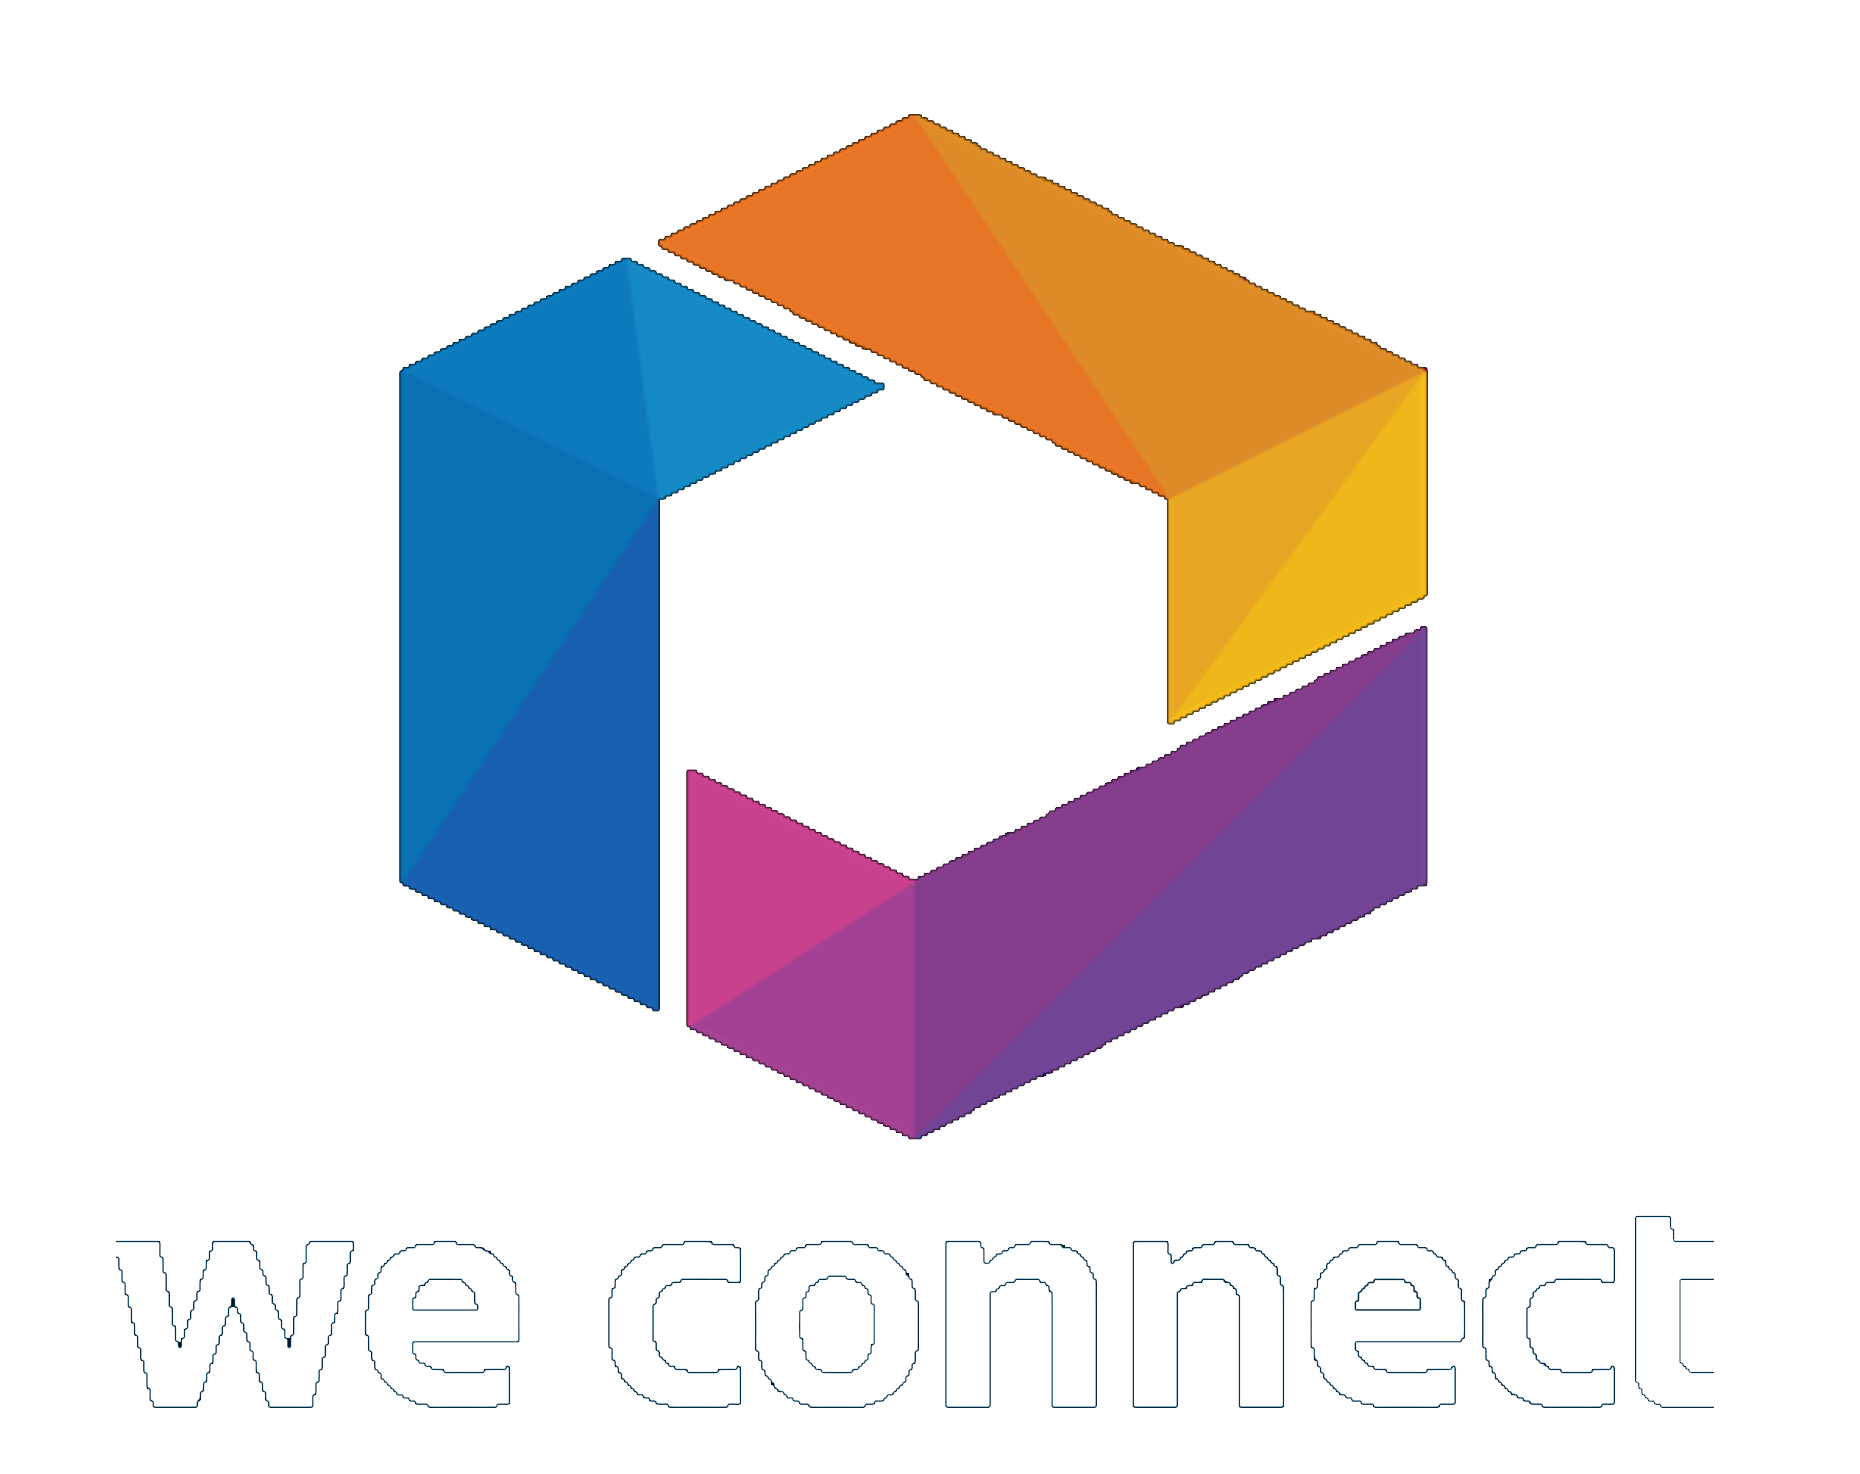 WeConnect